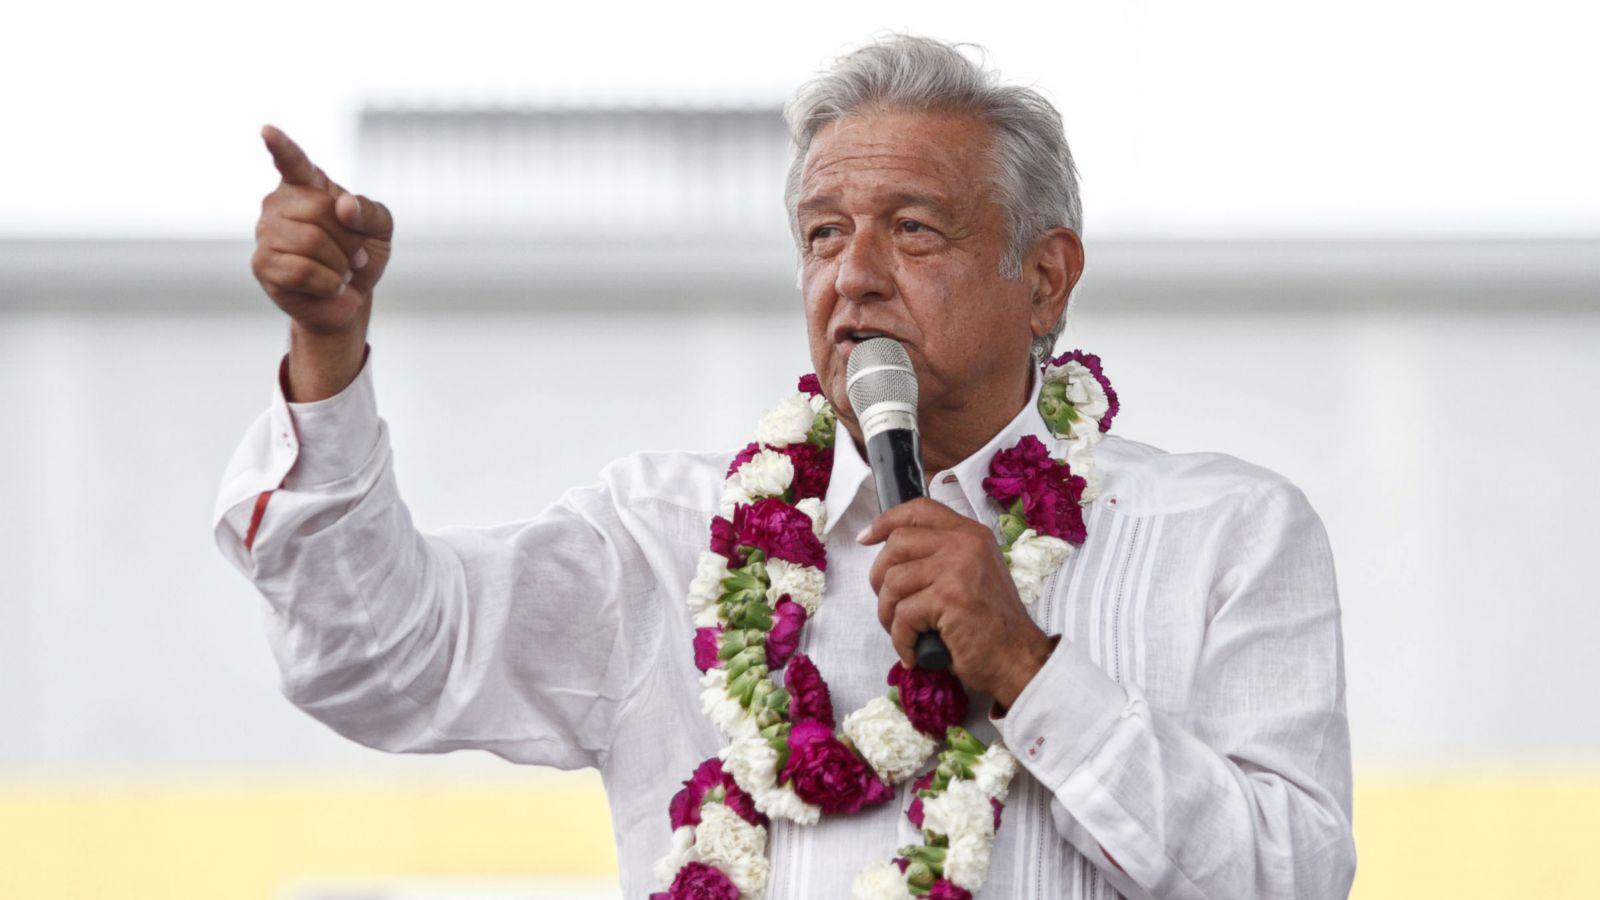 Amlo, the leftist candidate leading Mexico's 2018 presidential race